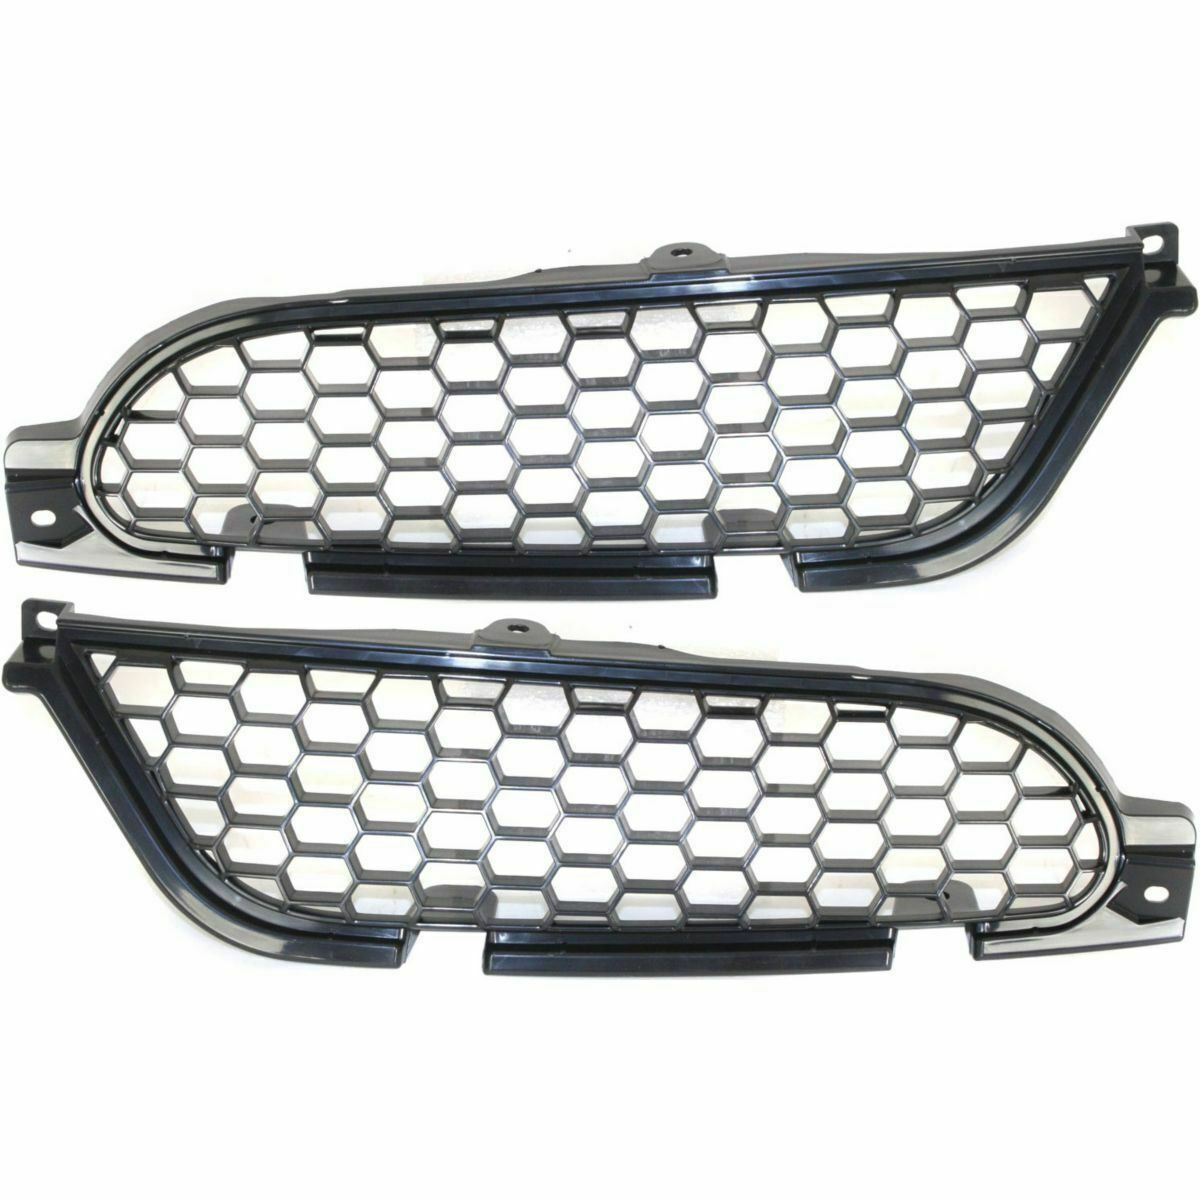 NEW Front Grille Insert Set Black R&L for 06-08 MITSUBISHI ECLIPSE Coupe Spyder